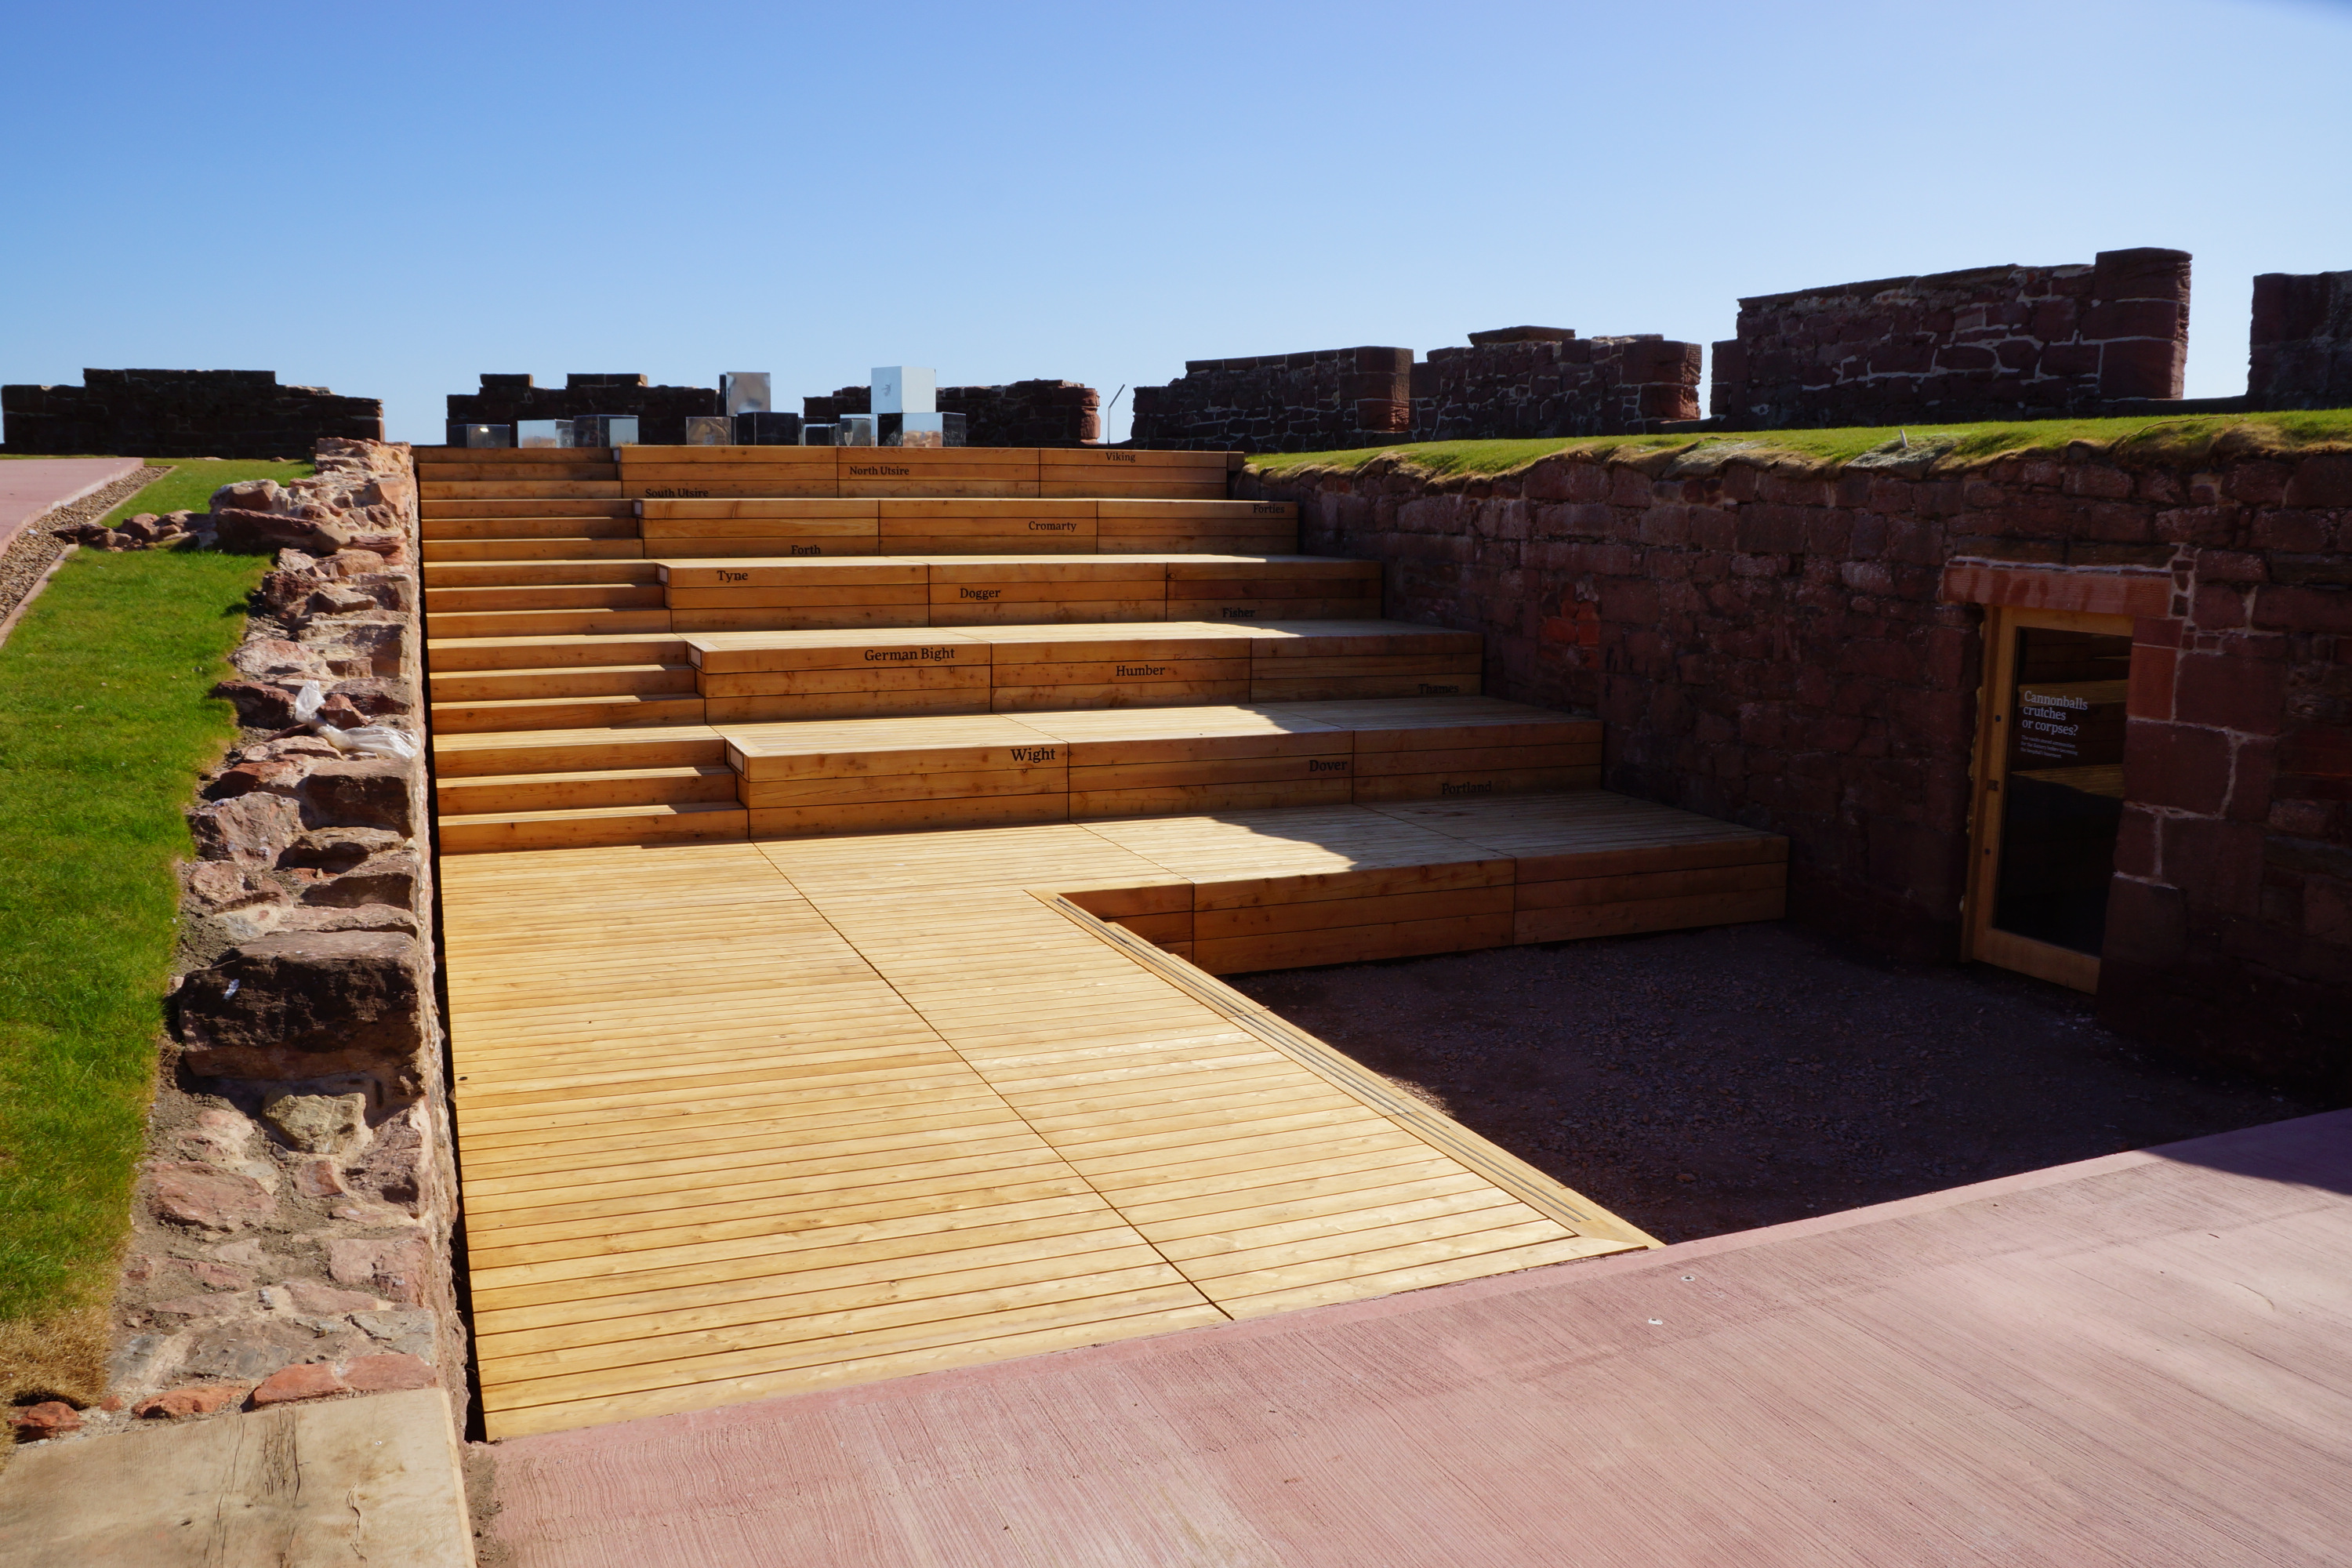 Amphitheatre seating and entrance to vaults